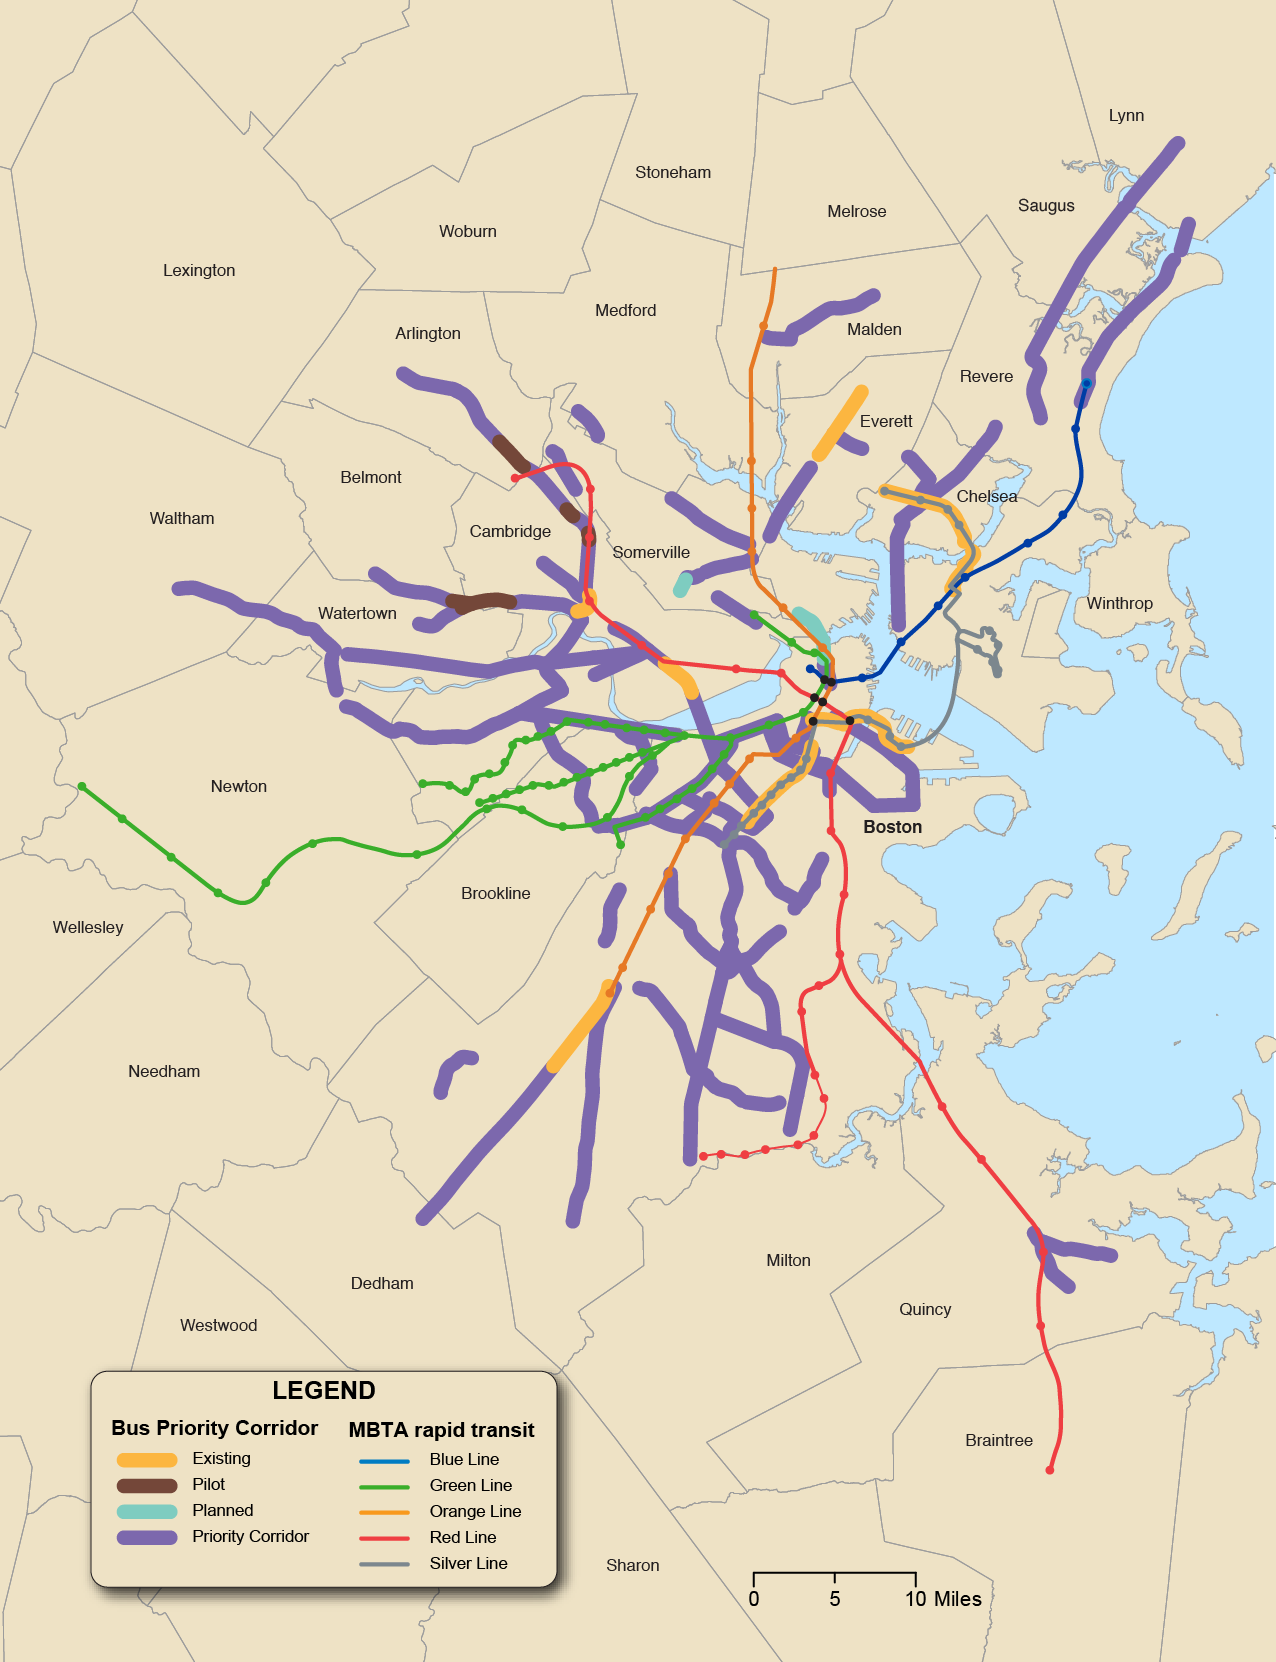 Figure 6-15 is a map of the Boston Region with MBTA Rapid Transit Lines. Figure 6-15 also shows Bus Priority Corridors by Existing, Pilot, Planned and Priority Corridor.